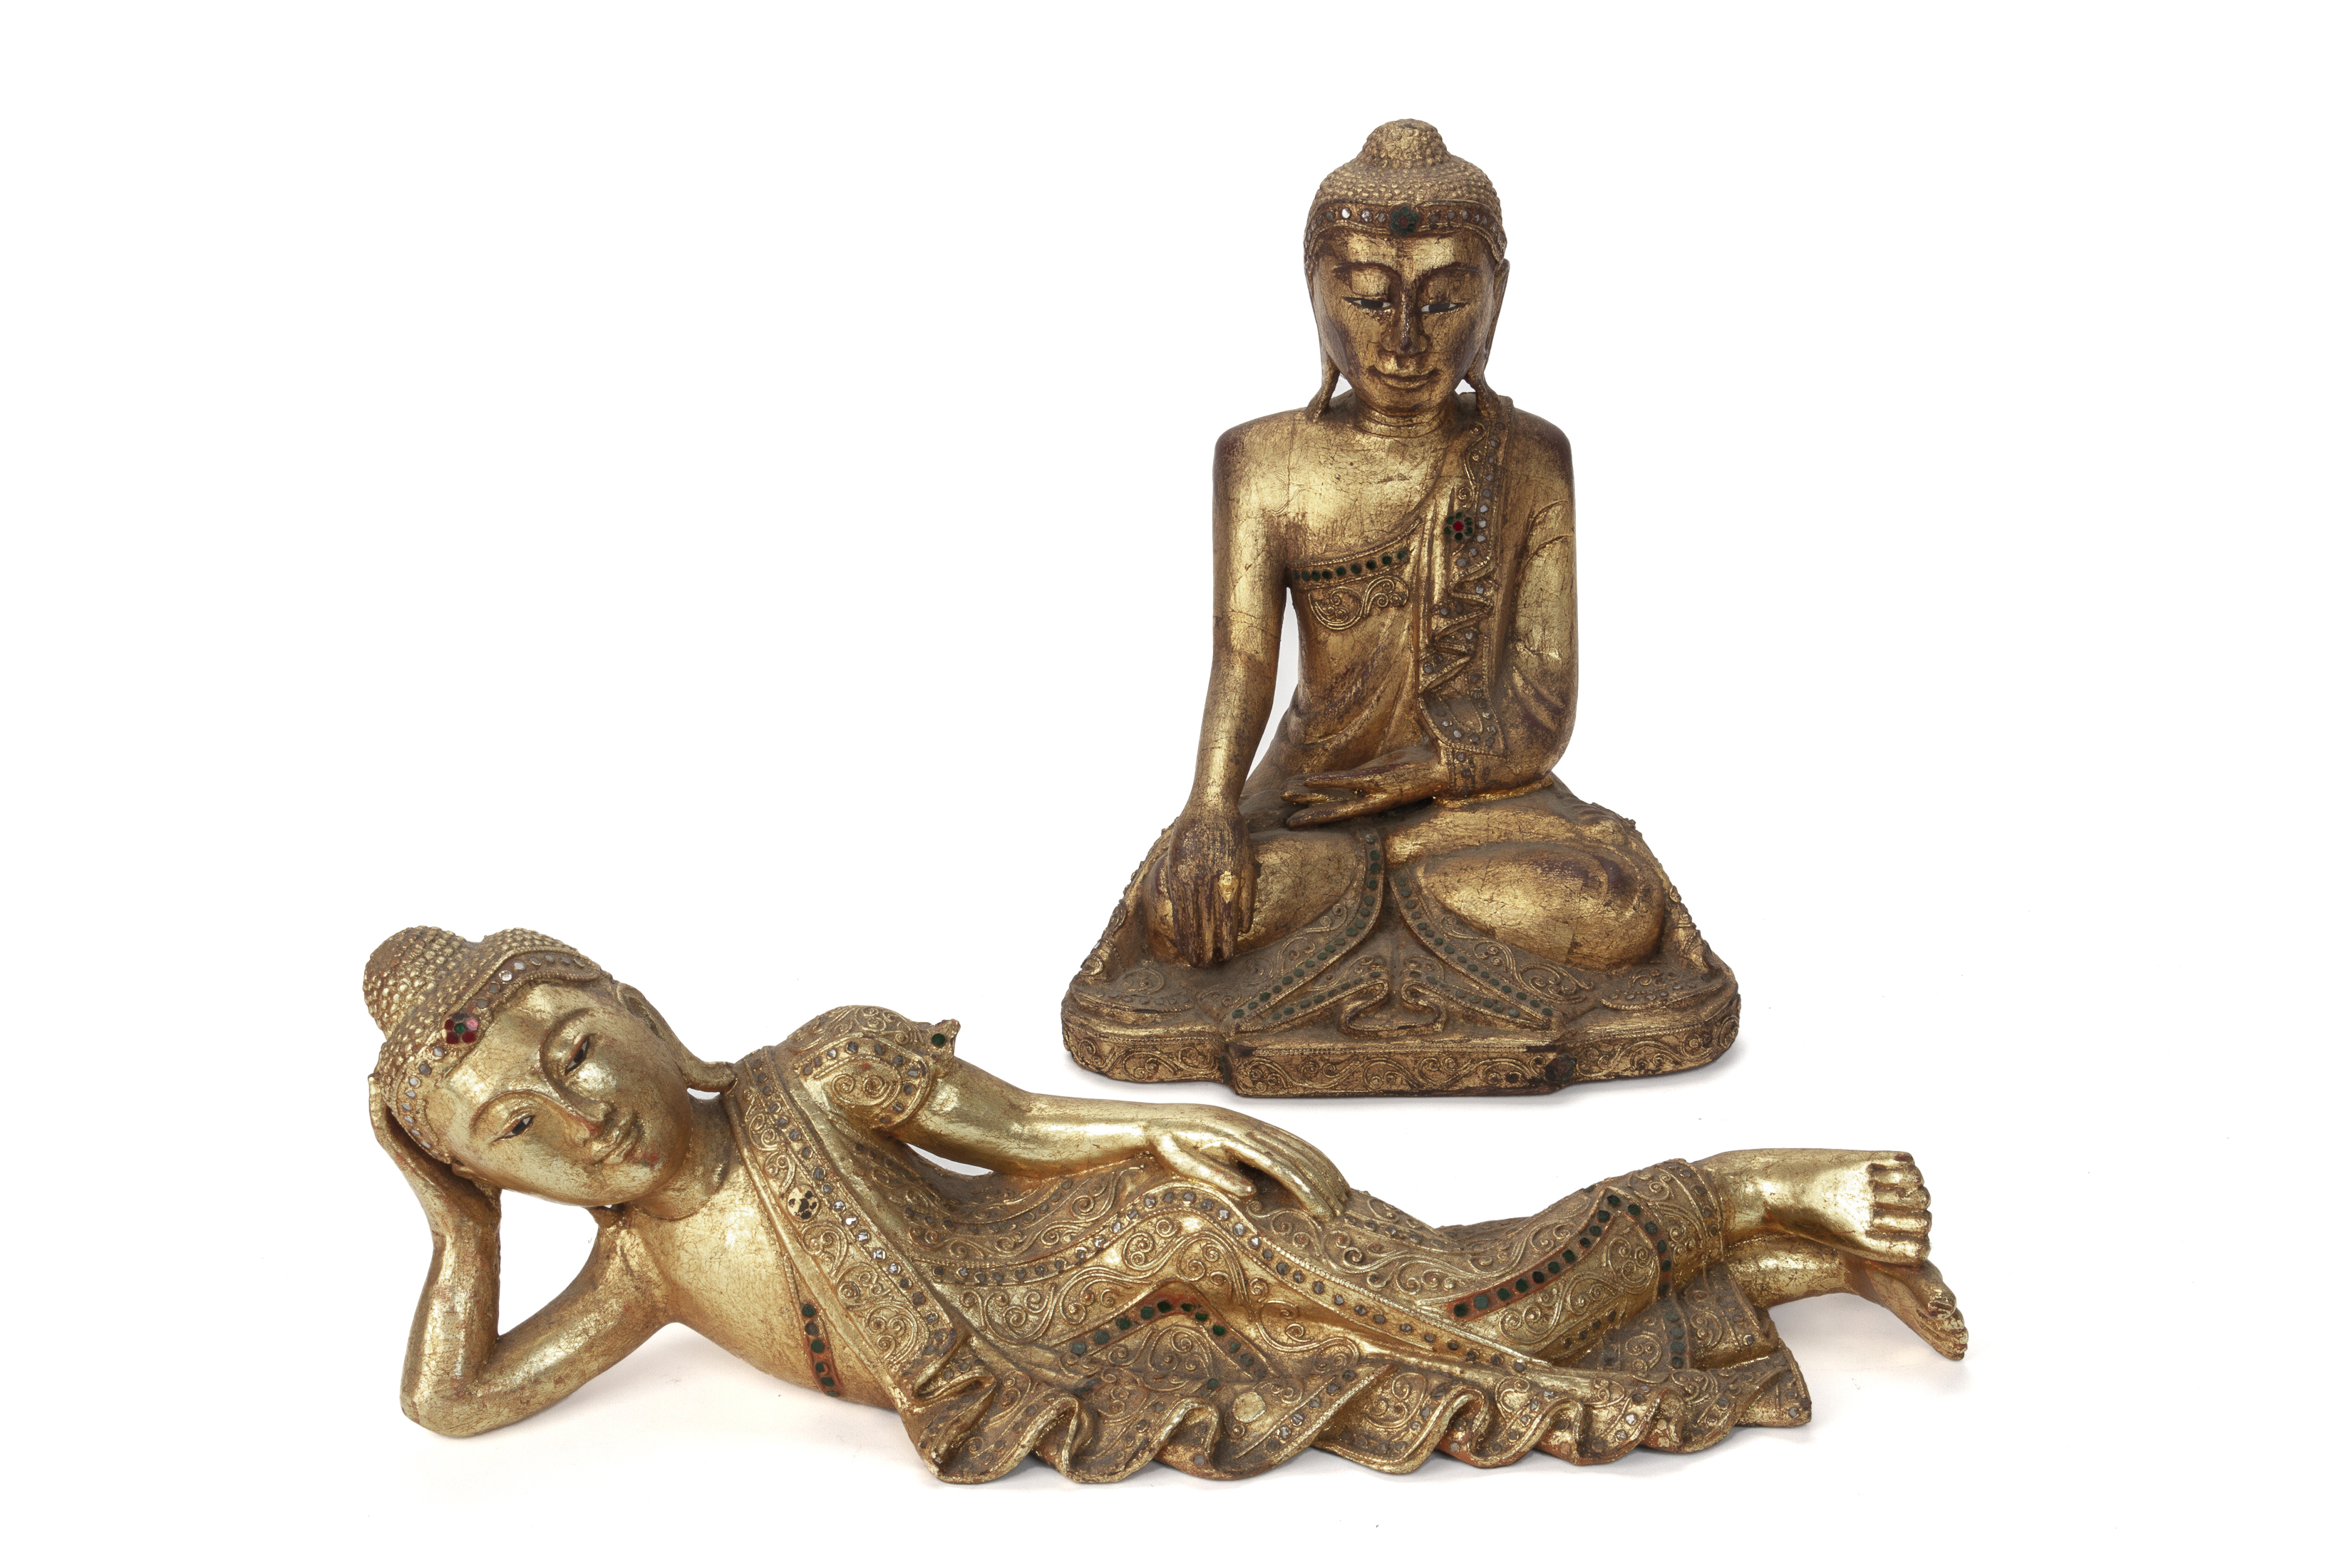 TWO SOUTHEAST ASIAN CARVED GILT WOOD BUDDHAS